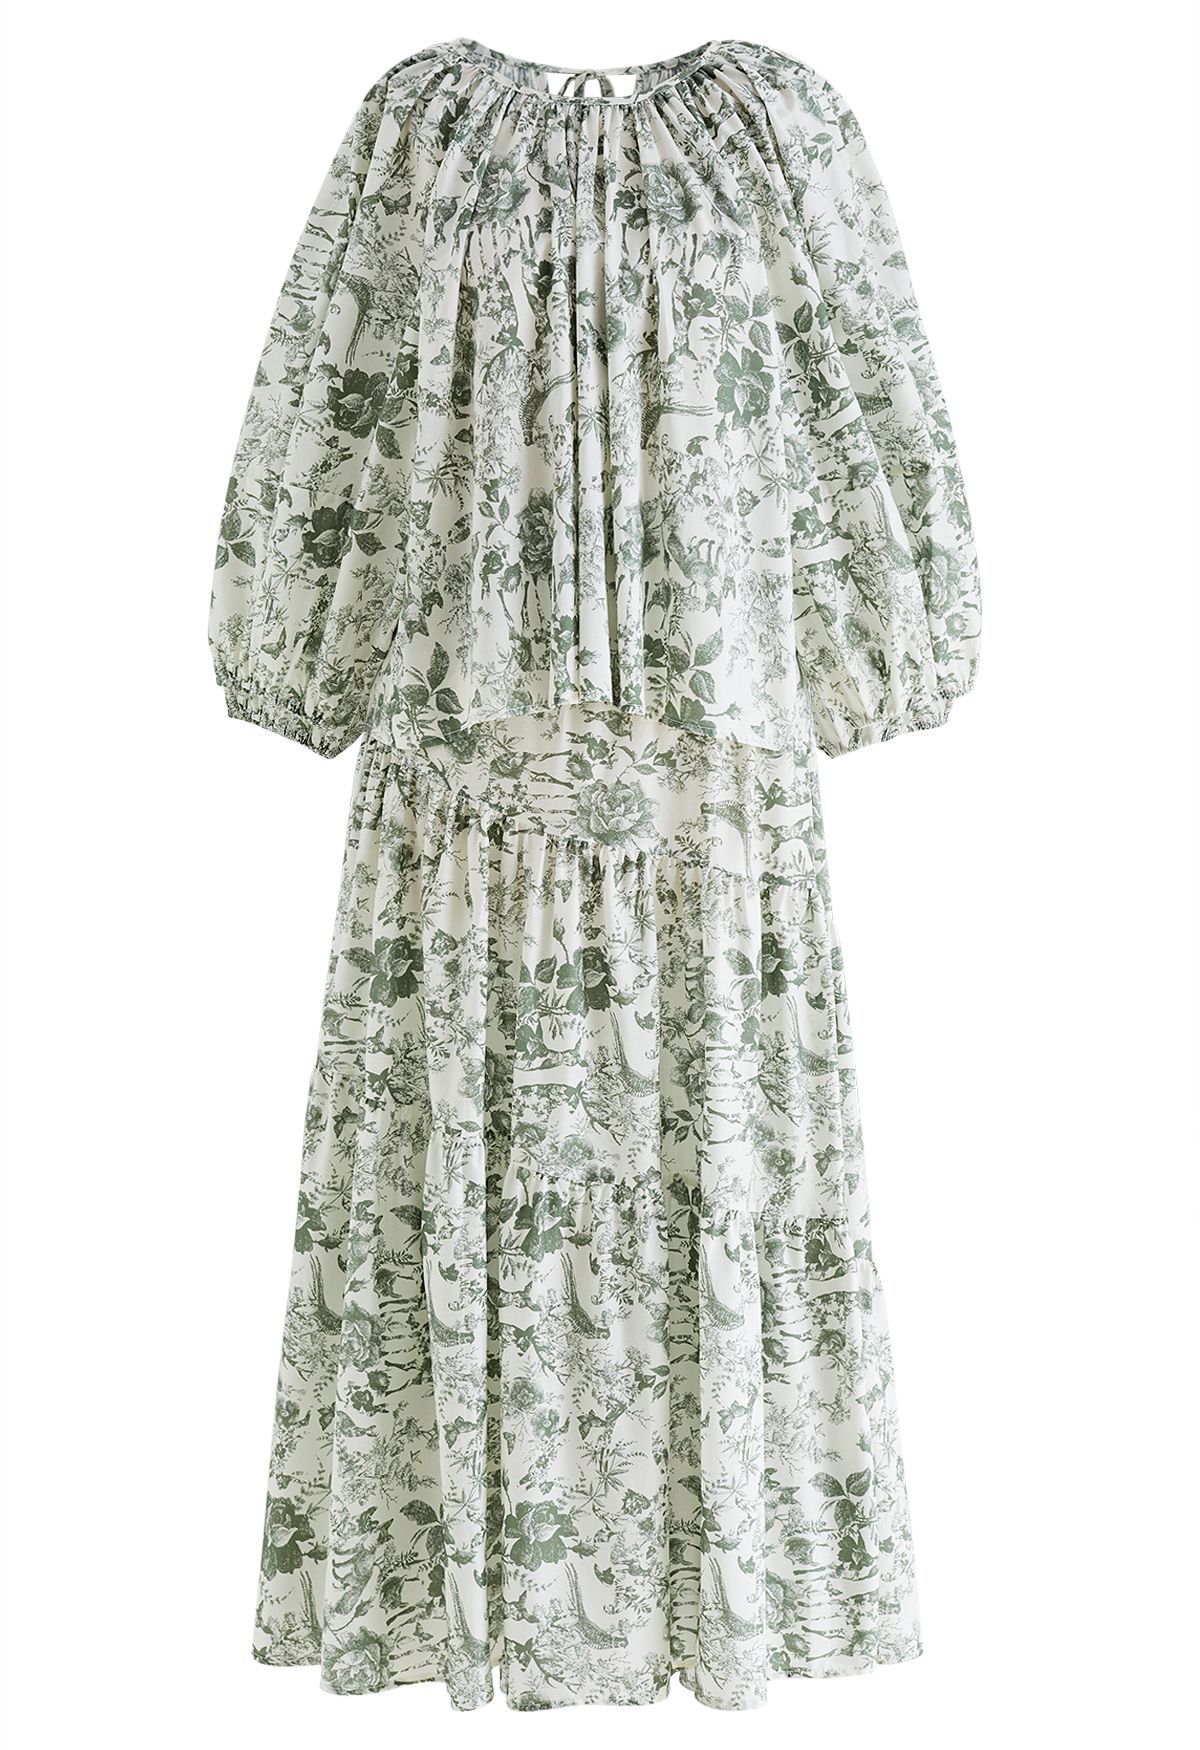 Spring Garden Printed Top and Maxi Skirt Set in Moss Green | Chicwish